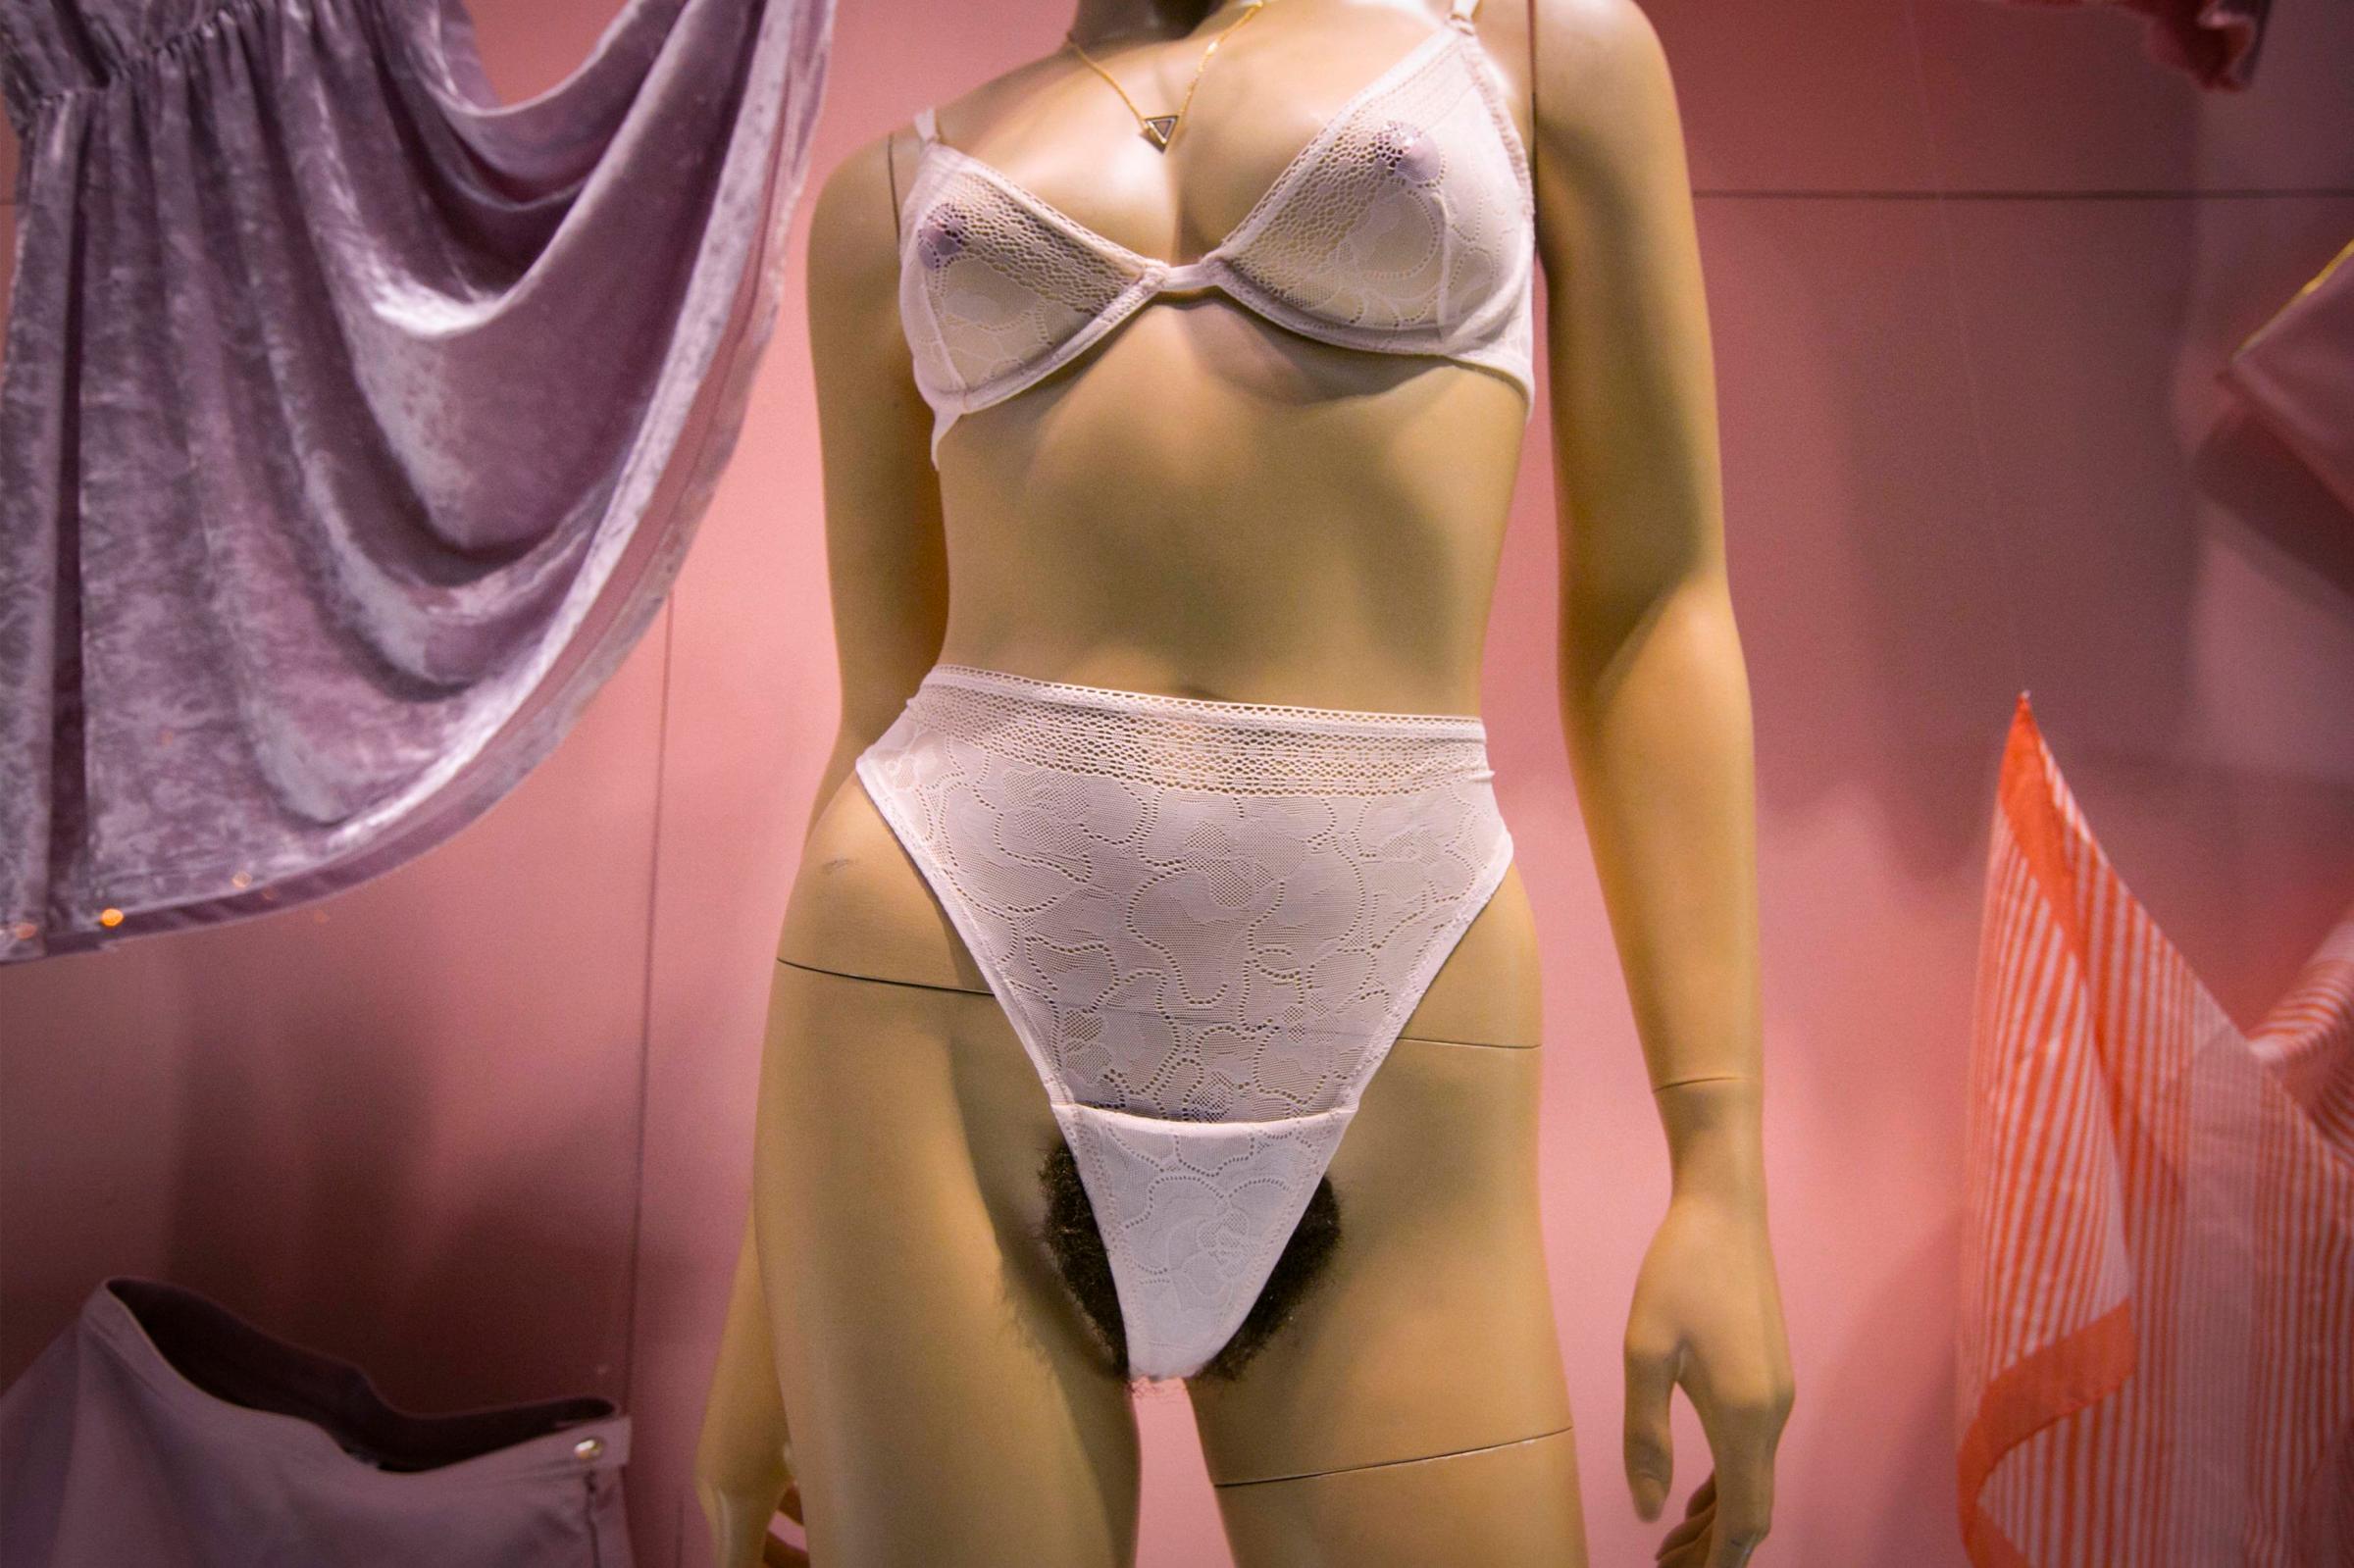 An anatomically correct female mannequin is displayed at the American Apparel store in the SoHo area of Manhattan, New York, Jan. 16, 2014. American Apparel's Lower East Side "Valentine's Day" window celebrates natural beauty, inviting passersby to explore the idea of what is "sexy" and consider their comfort with the natural female form, according to the company.